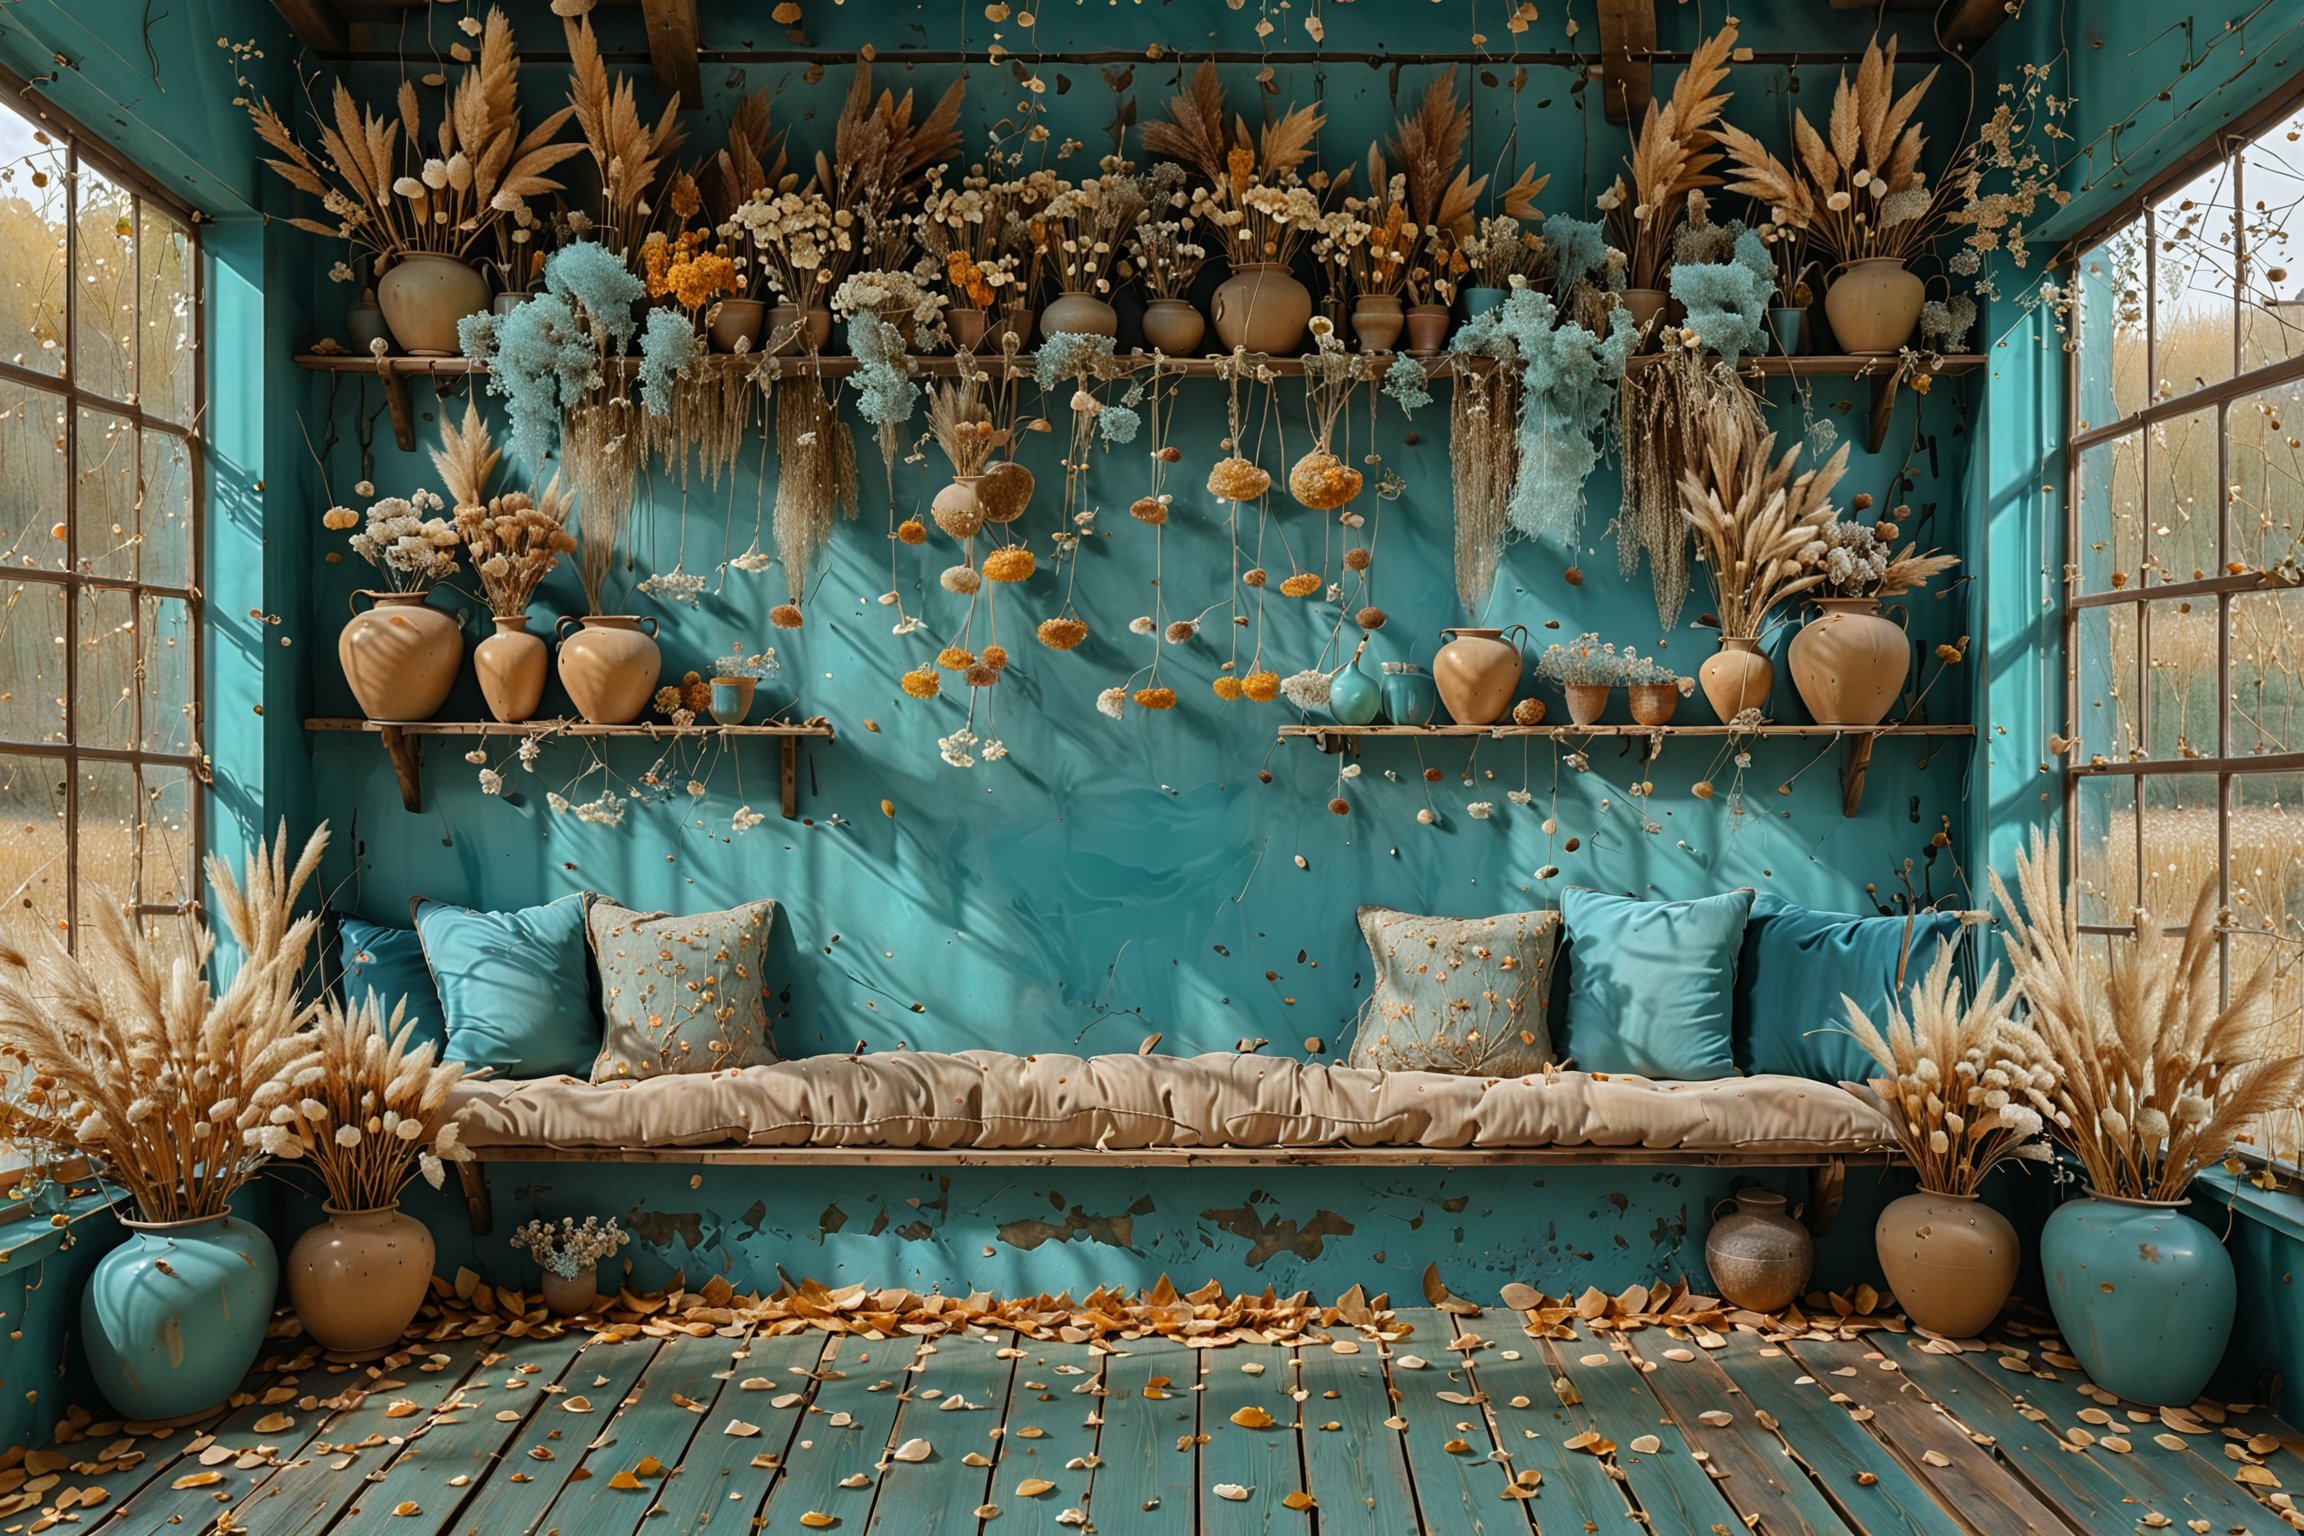 A cozy indoor setting with a rustic aesthetic. Dominated by a teal-colored wall, the space is adorned with dried flowers in various pots and vases, some hanging from the ceiling and others placed on shelves. A comfortable seating area is present with cushions in neutral tones. The floor is wooden and scattered with dried flower petals. A large window on the left allows natural light to flood in, revealing an outdoor view of trees with autumn leaves.